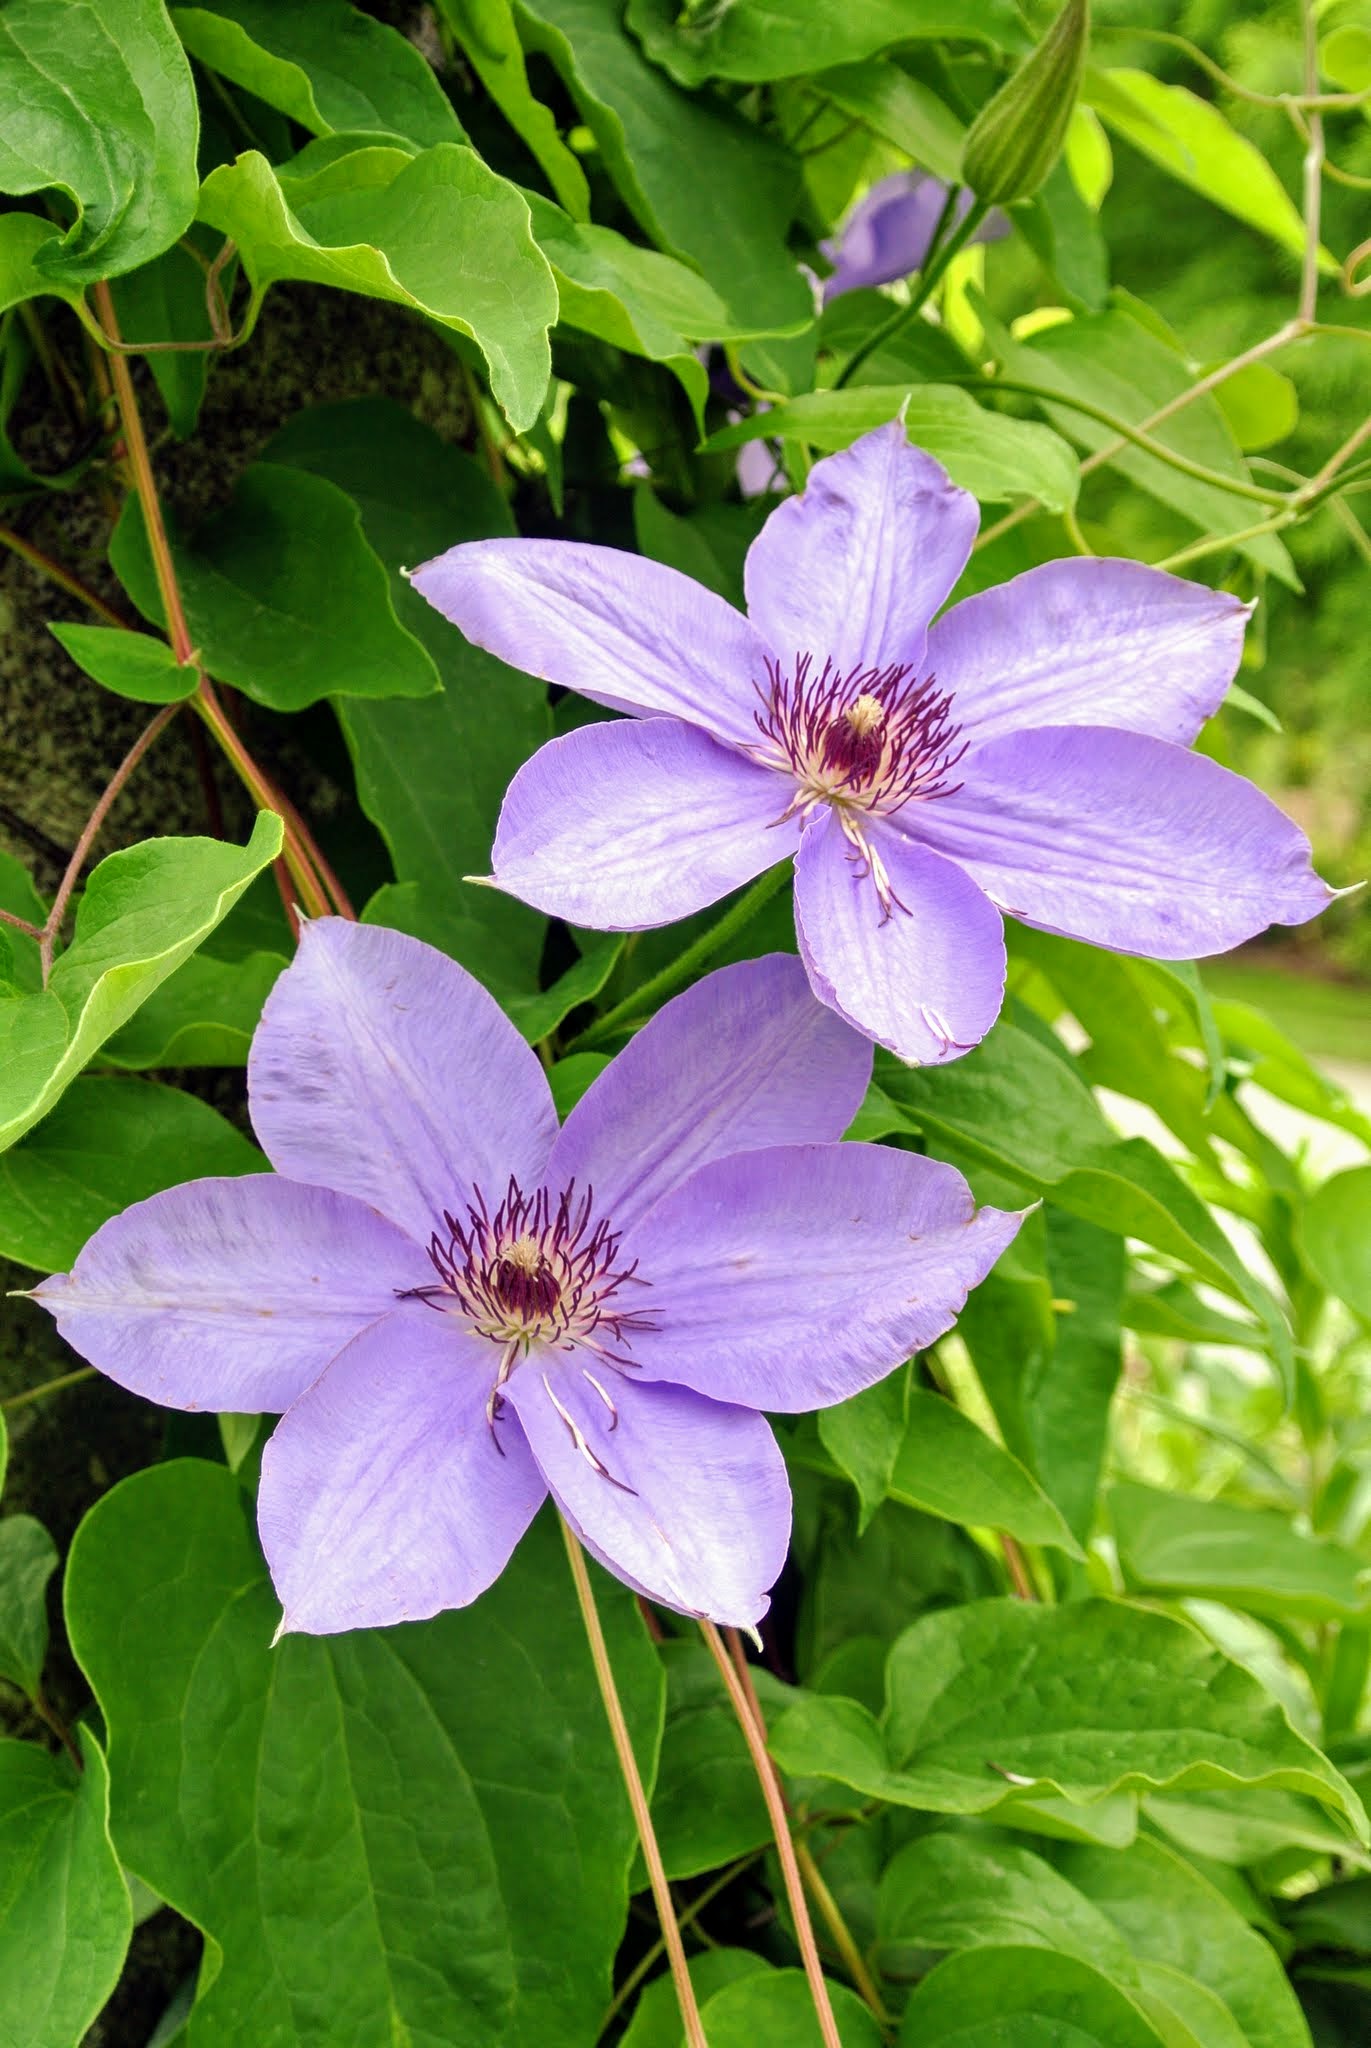 Blooming Clematis at My Farm - The Martha Stewart Blog